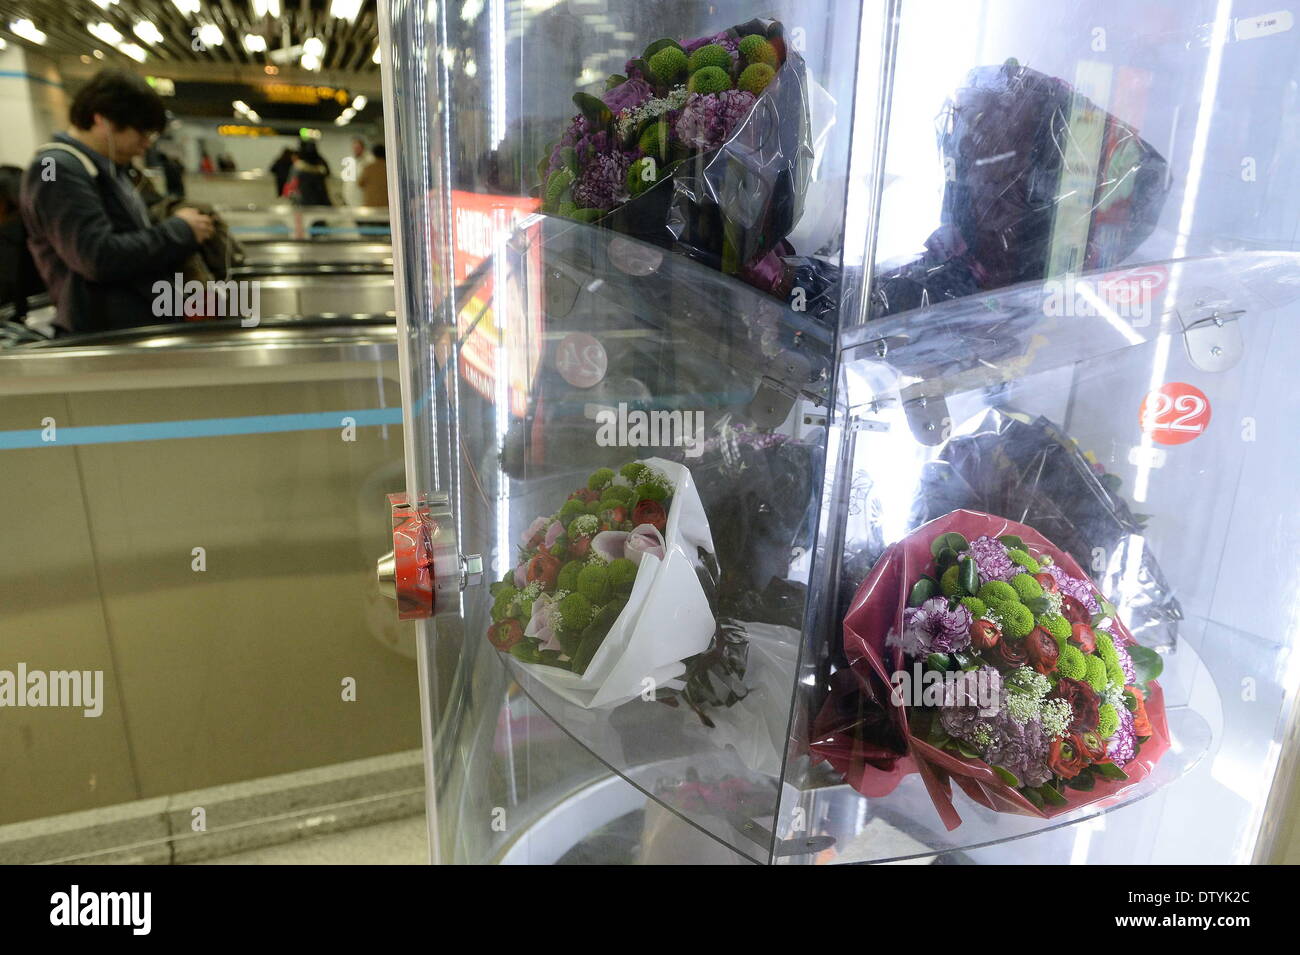 Shanghai, China's Shanghai. 25th Feb, 2014. Photo taken on Feb. 25, 2014 shows a flower vending machine at a subway station in east China's Shanghai, Feb. 25, 2014. Through the vending machine, people can get flowers conveniently after inserting money for payment. © Lai Xinlin/Xinhua/Alamy Live News Stock Photo